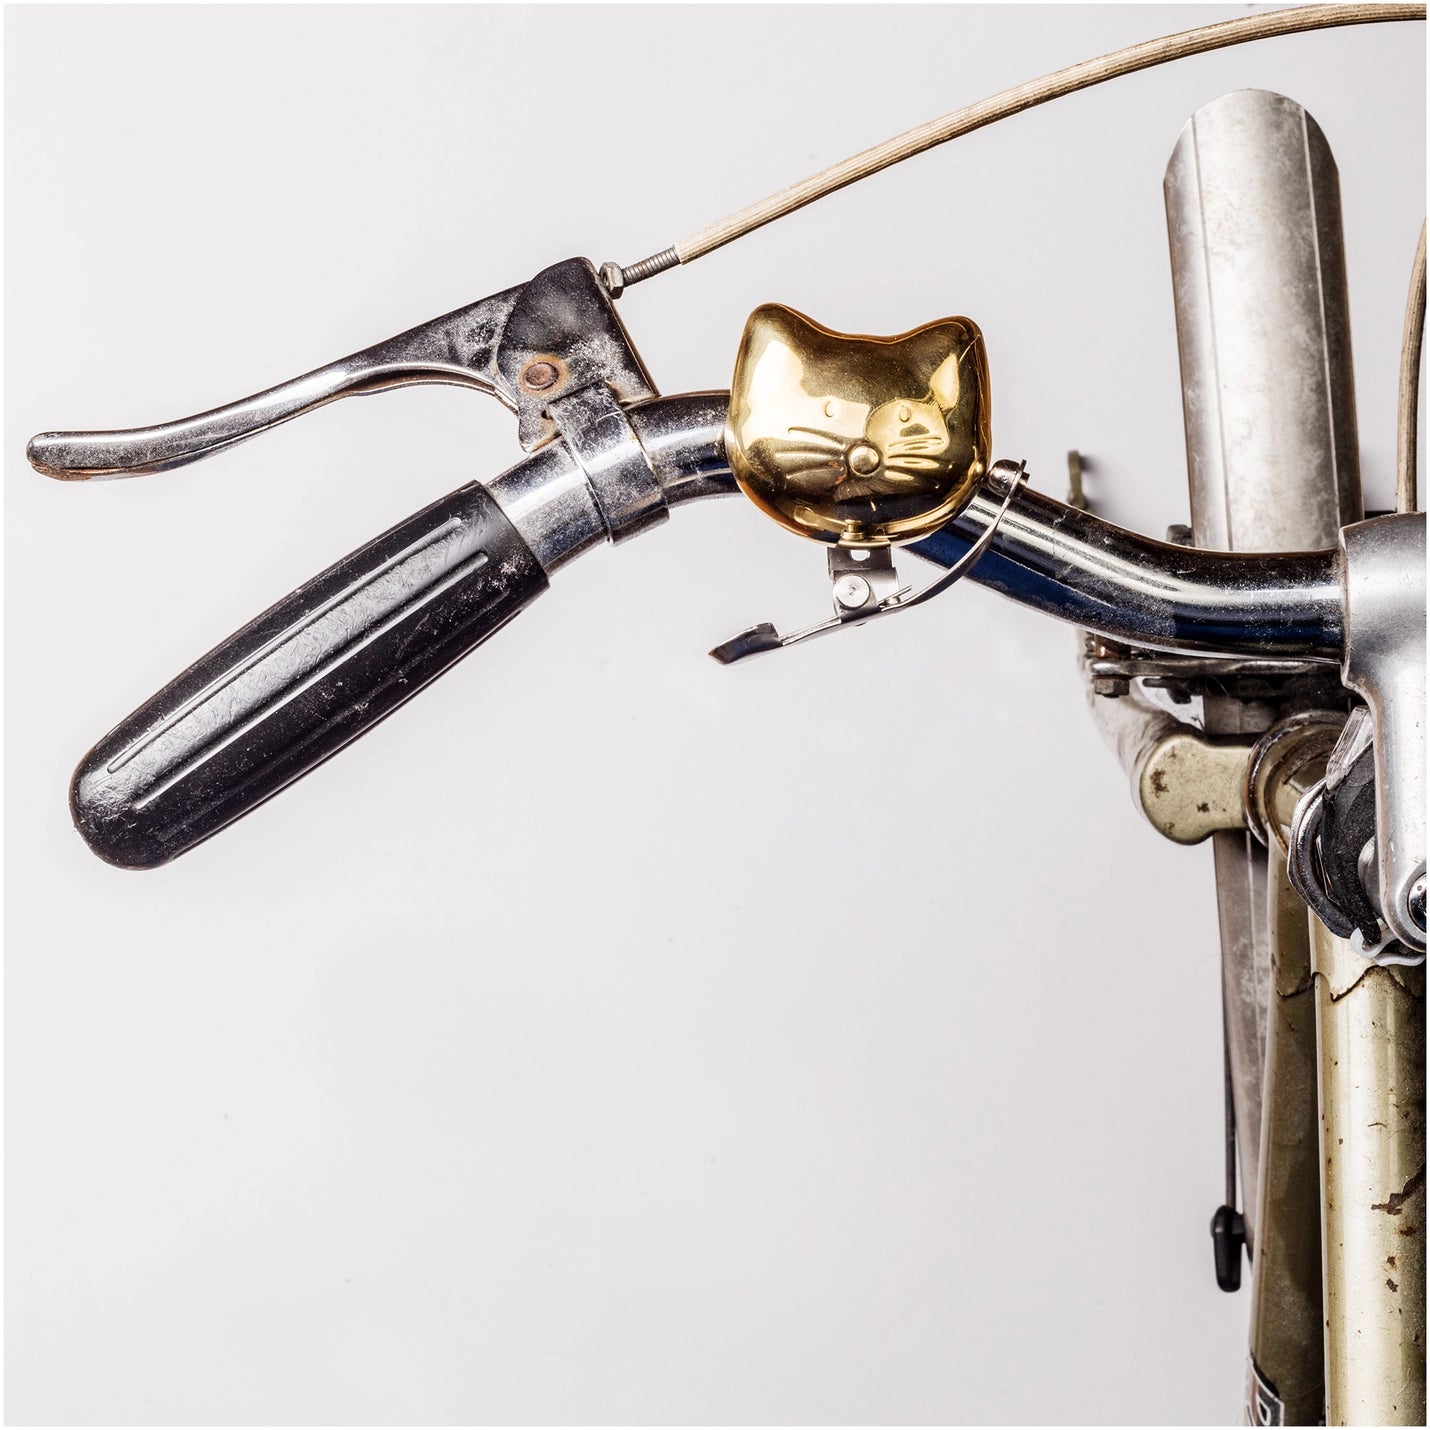 Simple yet effective, the Cat Bicycle Bell uses centuries old, trusted technology to warn people out of your way: a compact brass bell with a sprung thumb lever. Stay safe while riding by installing this golden kitty shaped bell to your bicycles, or scooters! Warn other road users and avoid cat-astrophe. Perfect for a cat-loving outdoor cyclist, it's a unique product full of cattitude. 